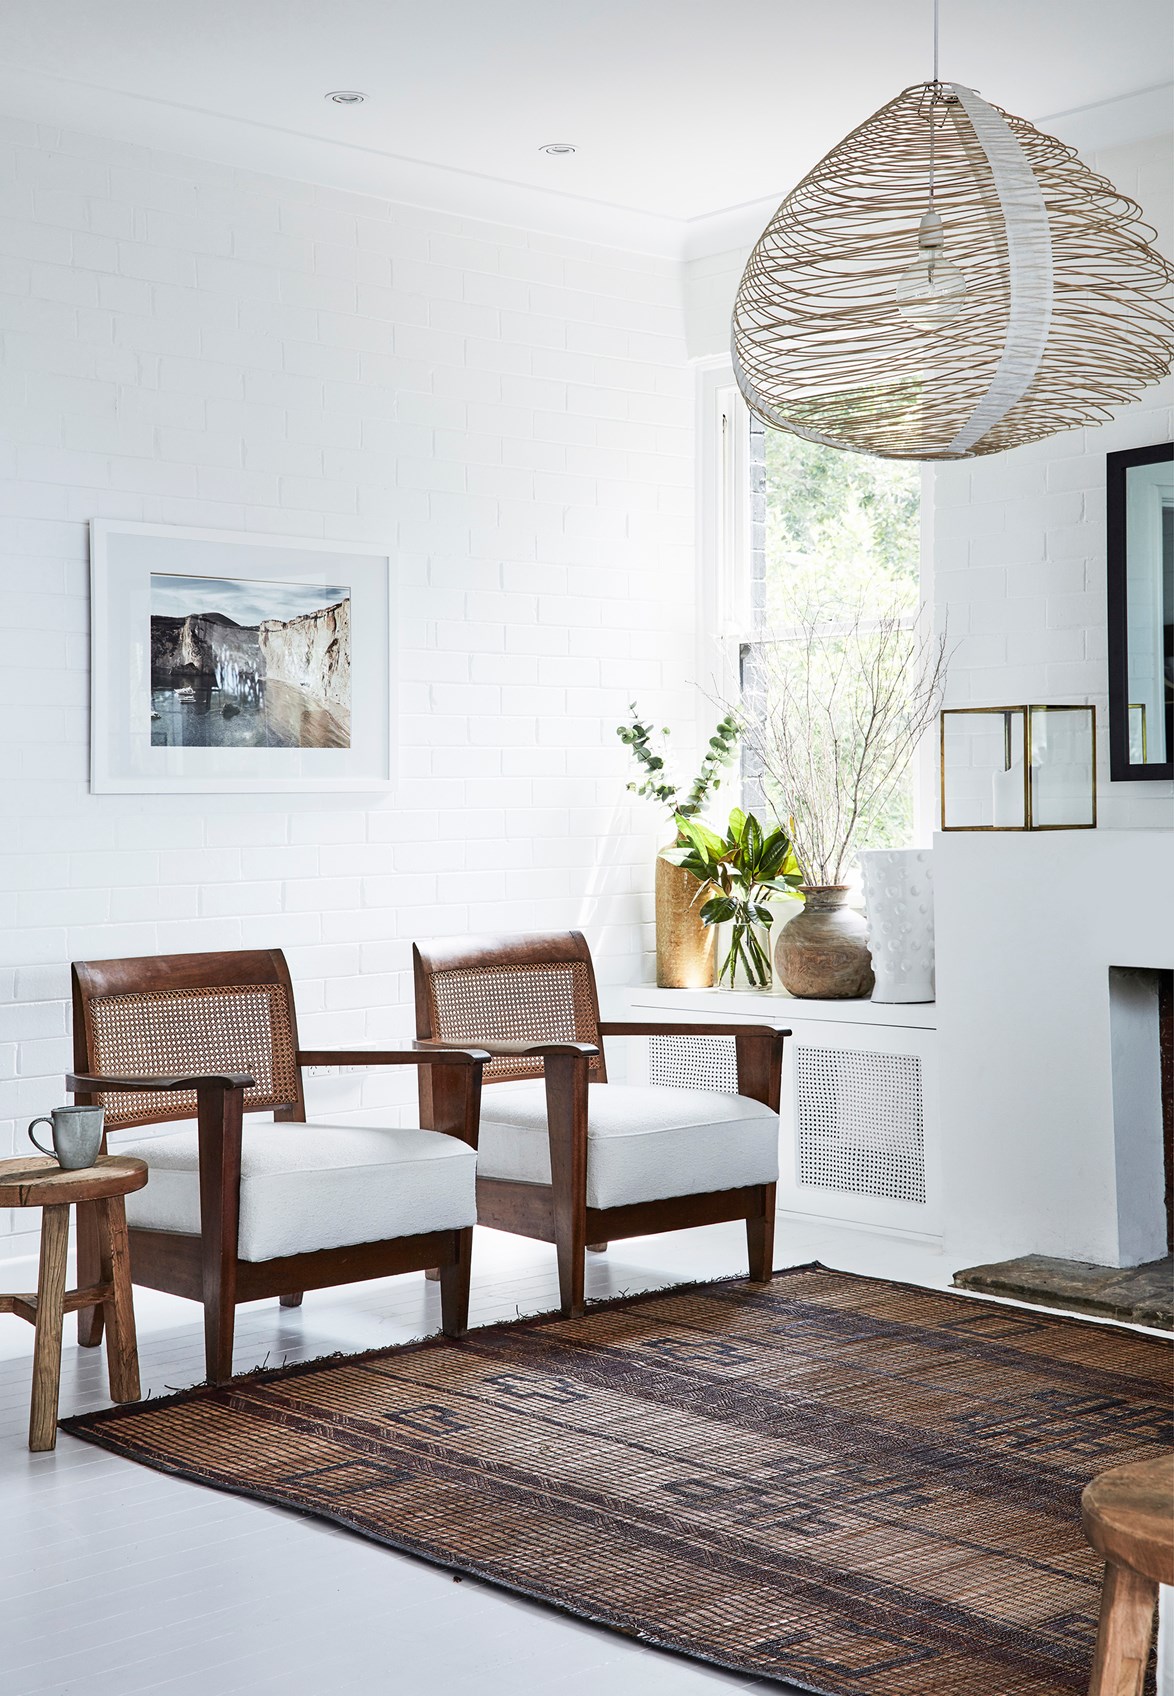 Coastal with a global twist, [interior designer Olivia Babarczy's home](https://www.homestolove.com.au/rustic-coastal-style-home-19795|target="_blank") blends old and new to create a beach house with plenty of personality. Filled with furniture sourced from around the world and finishes that tie in seamlessly with the seaside location and architectural style of the house, this home emits a relaxed holiday vibe, all year round.